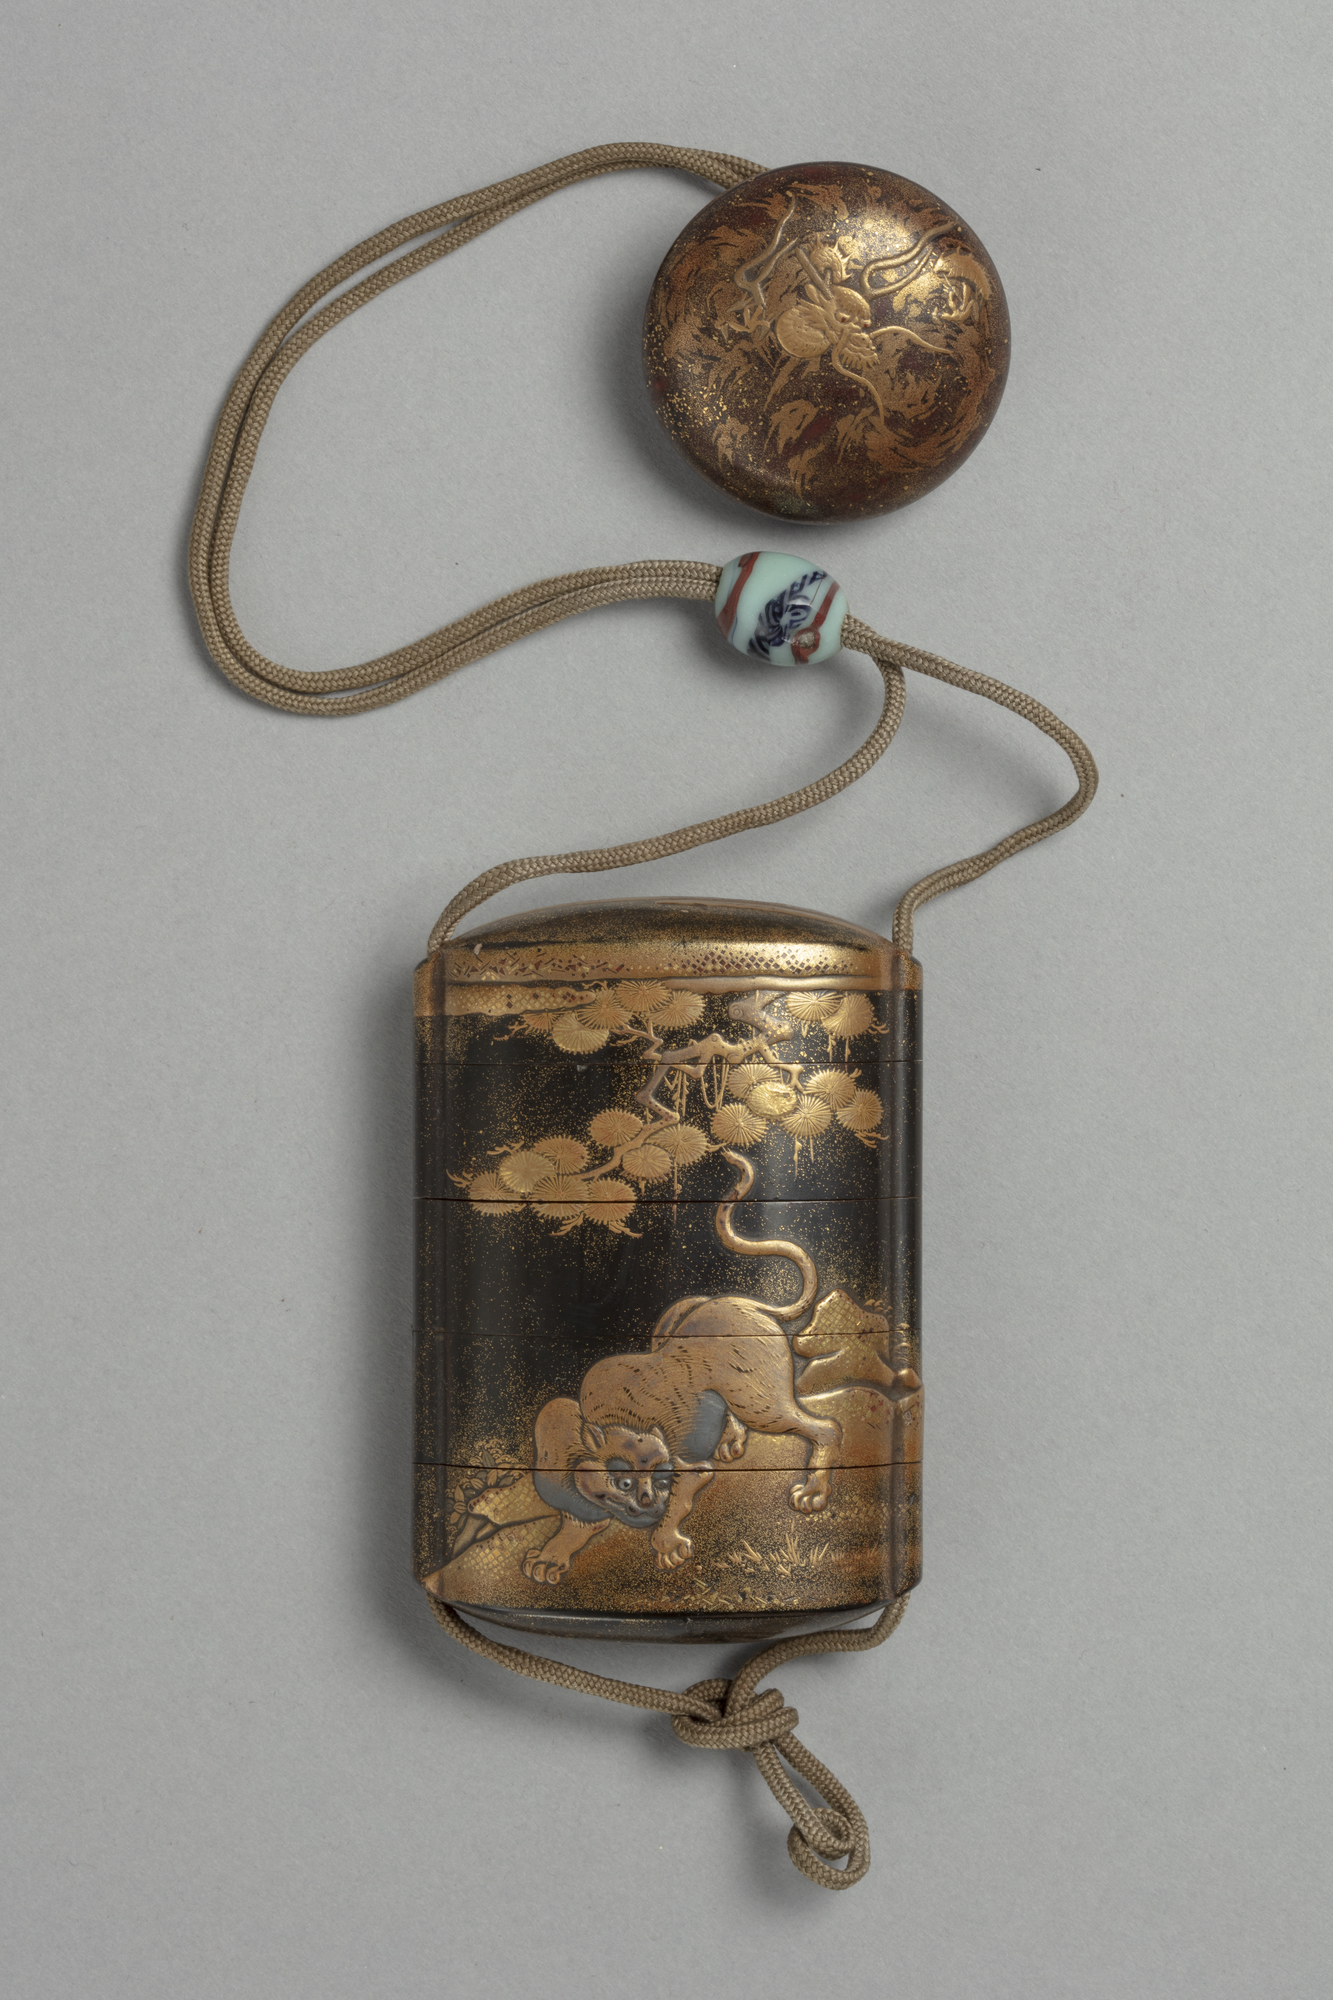 A Japanese black and gold lacquered five compartment inro box with dragon and tiger design, attached to a circular lacquer netsuke toggle.